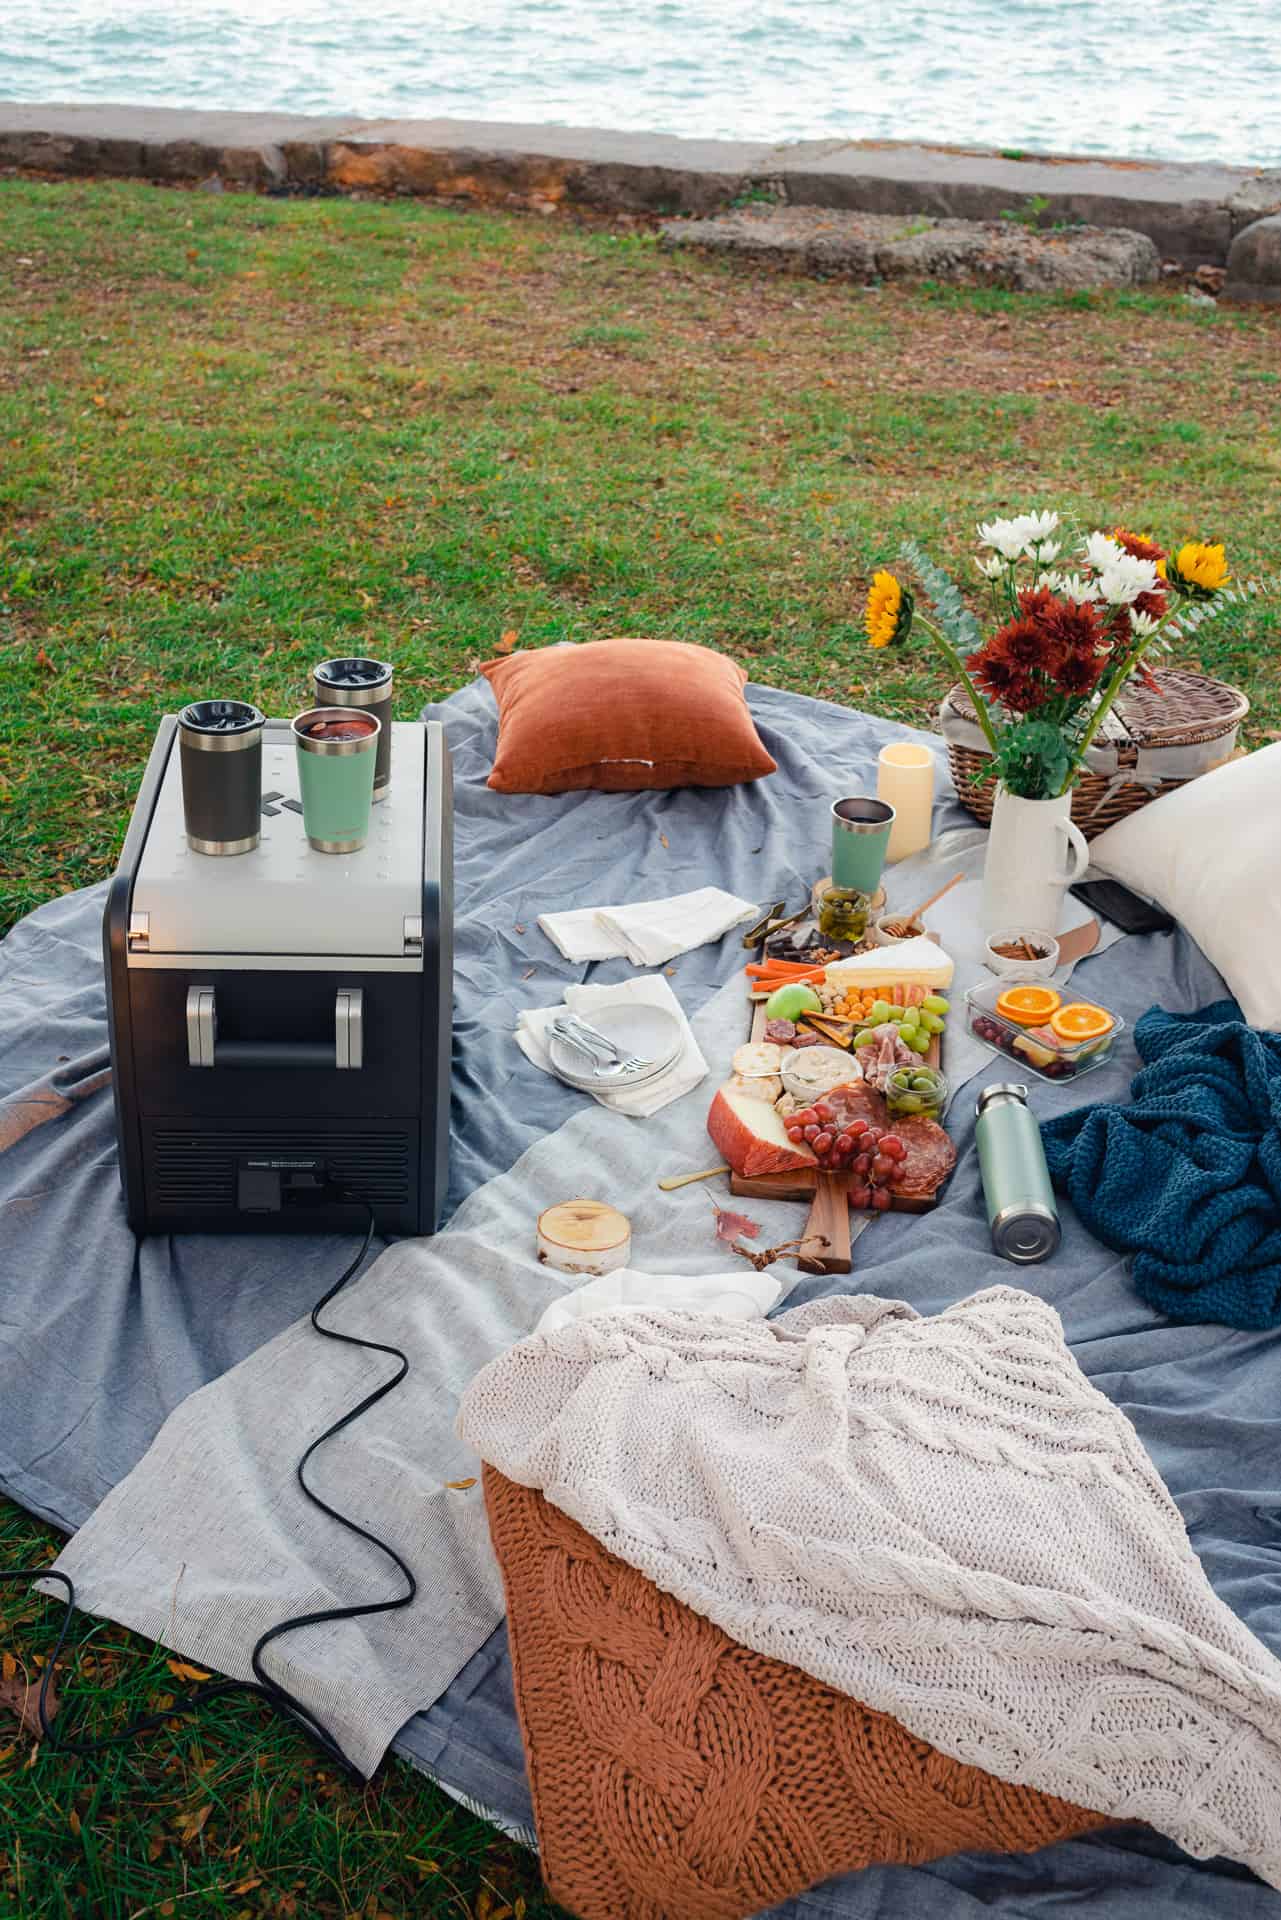 picnic date setup with flowers, a picnic basket, charcuterie board, cozy pillows, blankets and an electric cooler with portable battery at the park facing the water